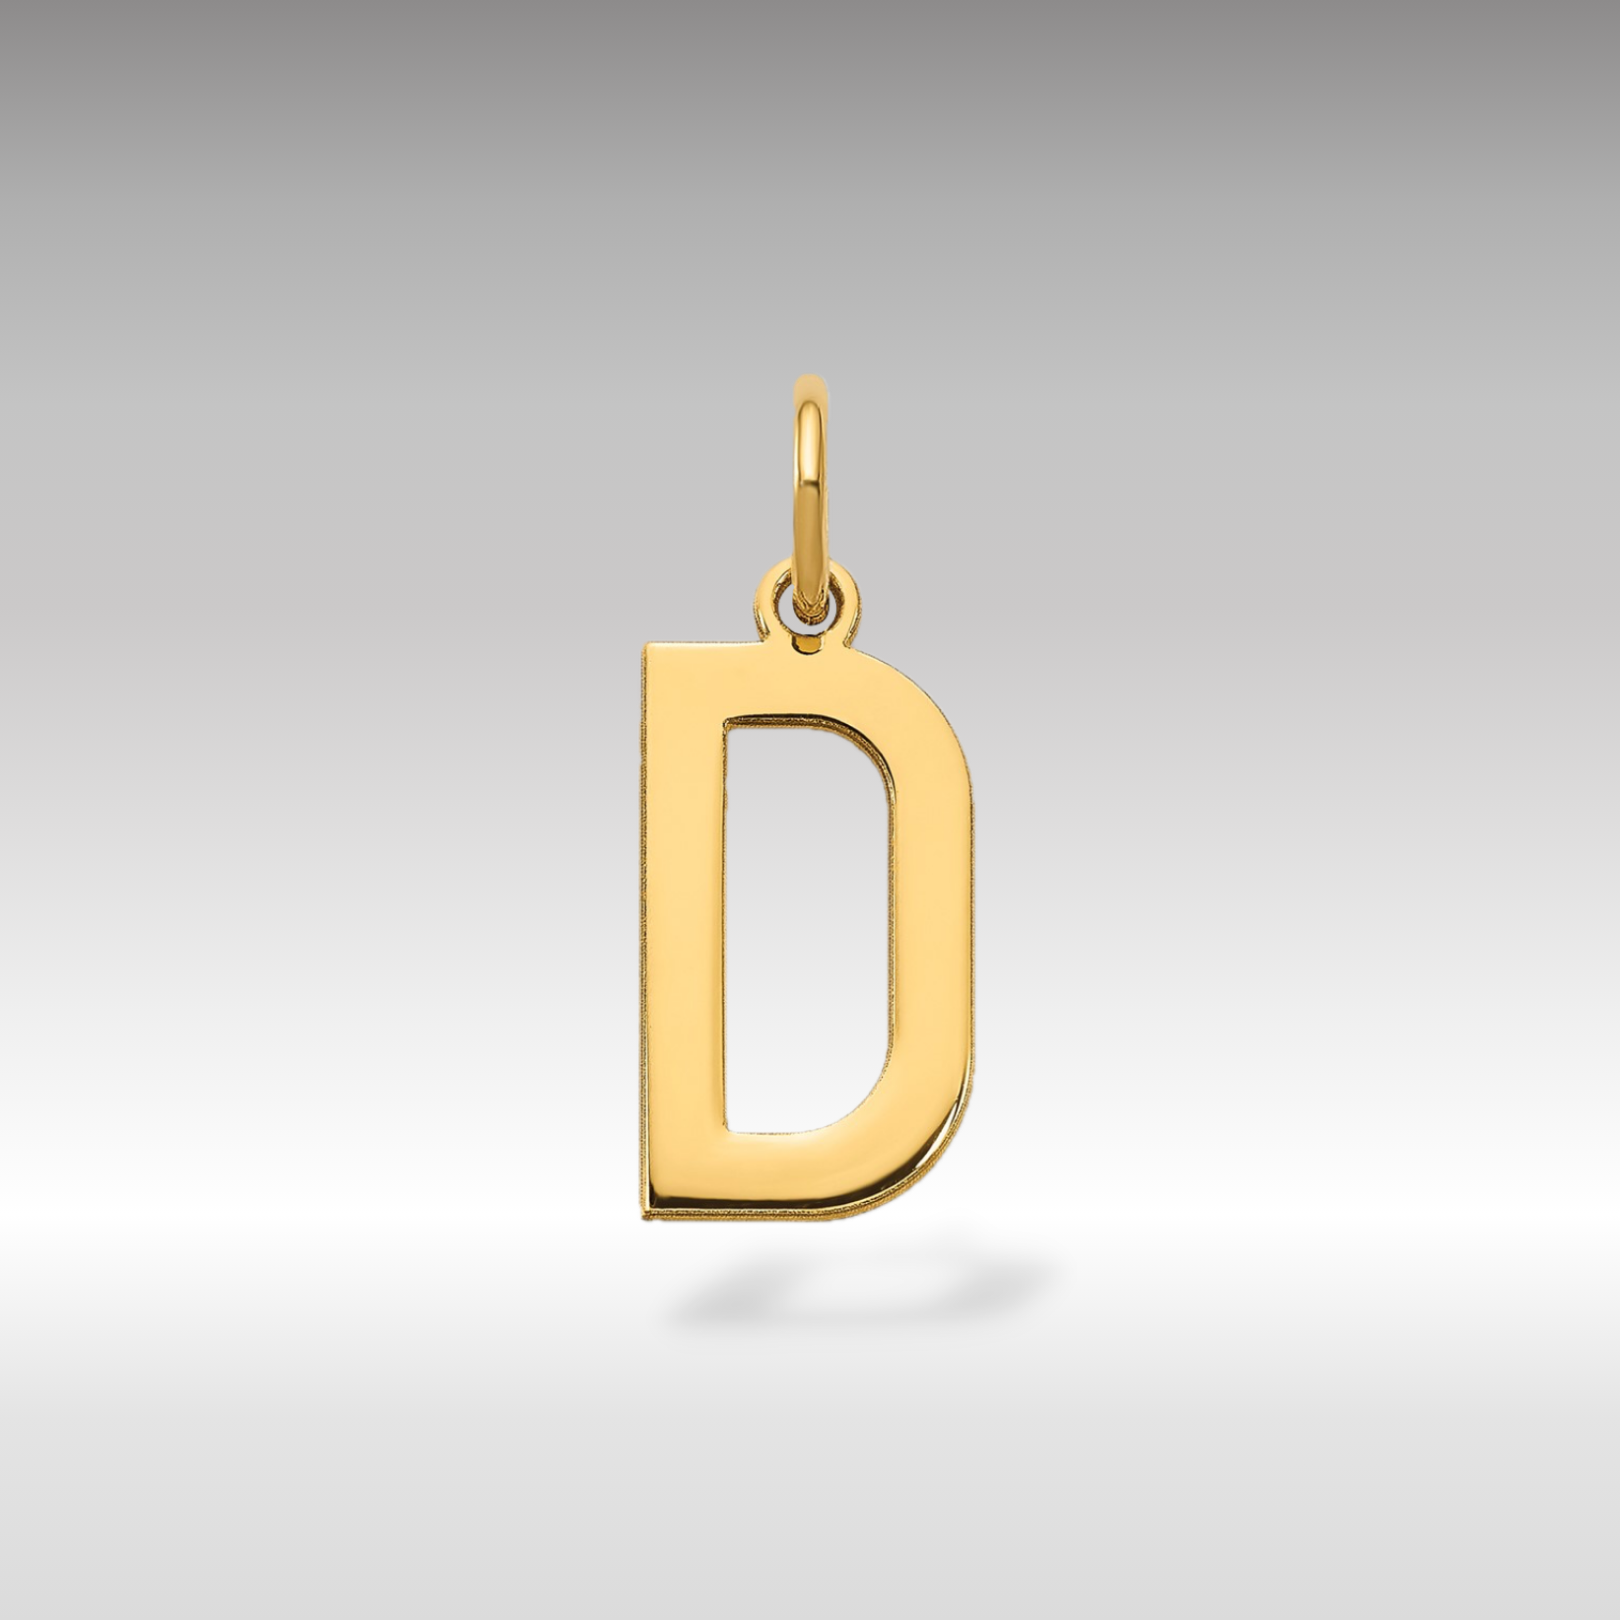 14K Gold Letter "D" Initial Pendant - Charlie & Co. Jewelry